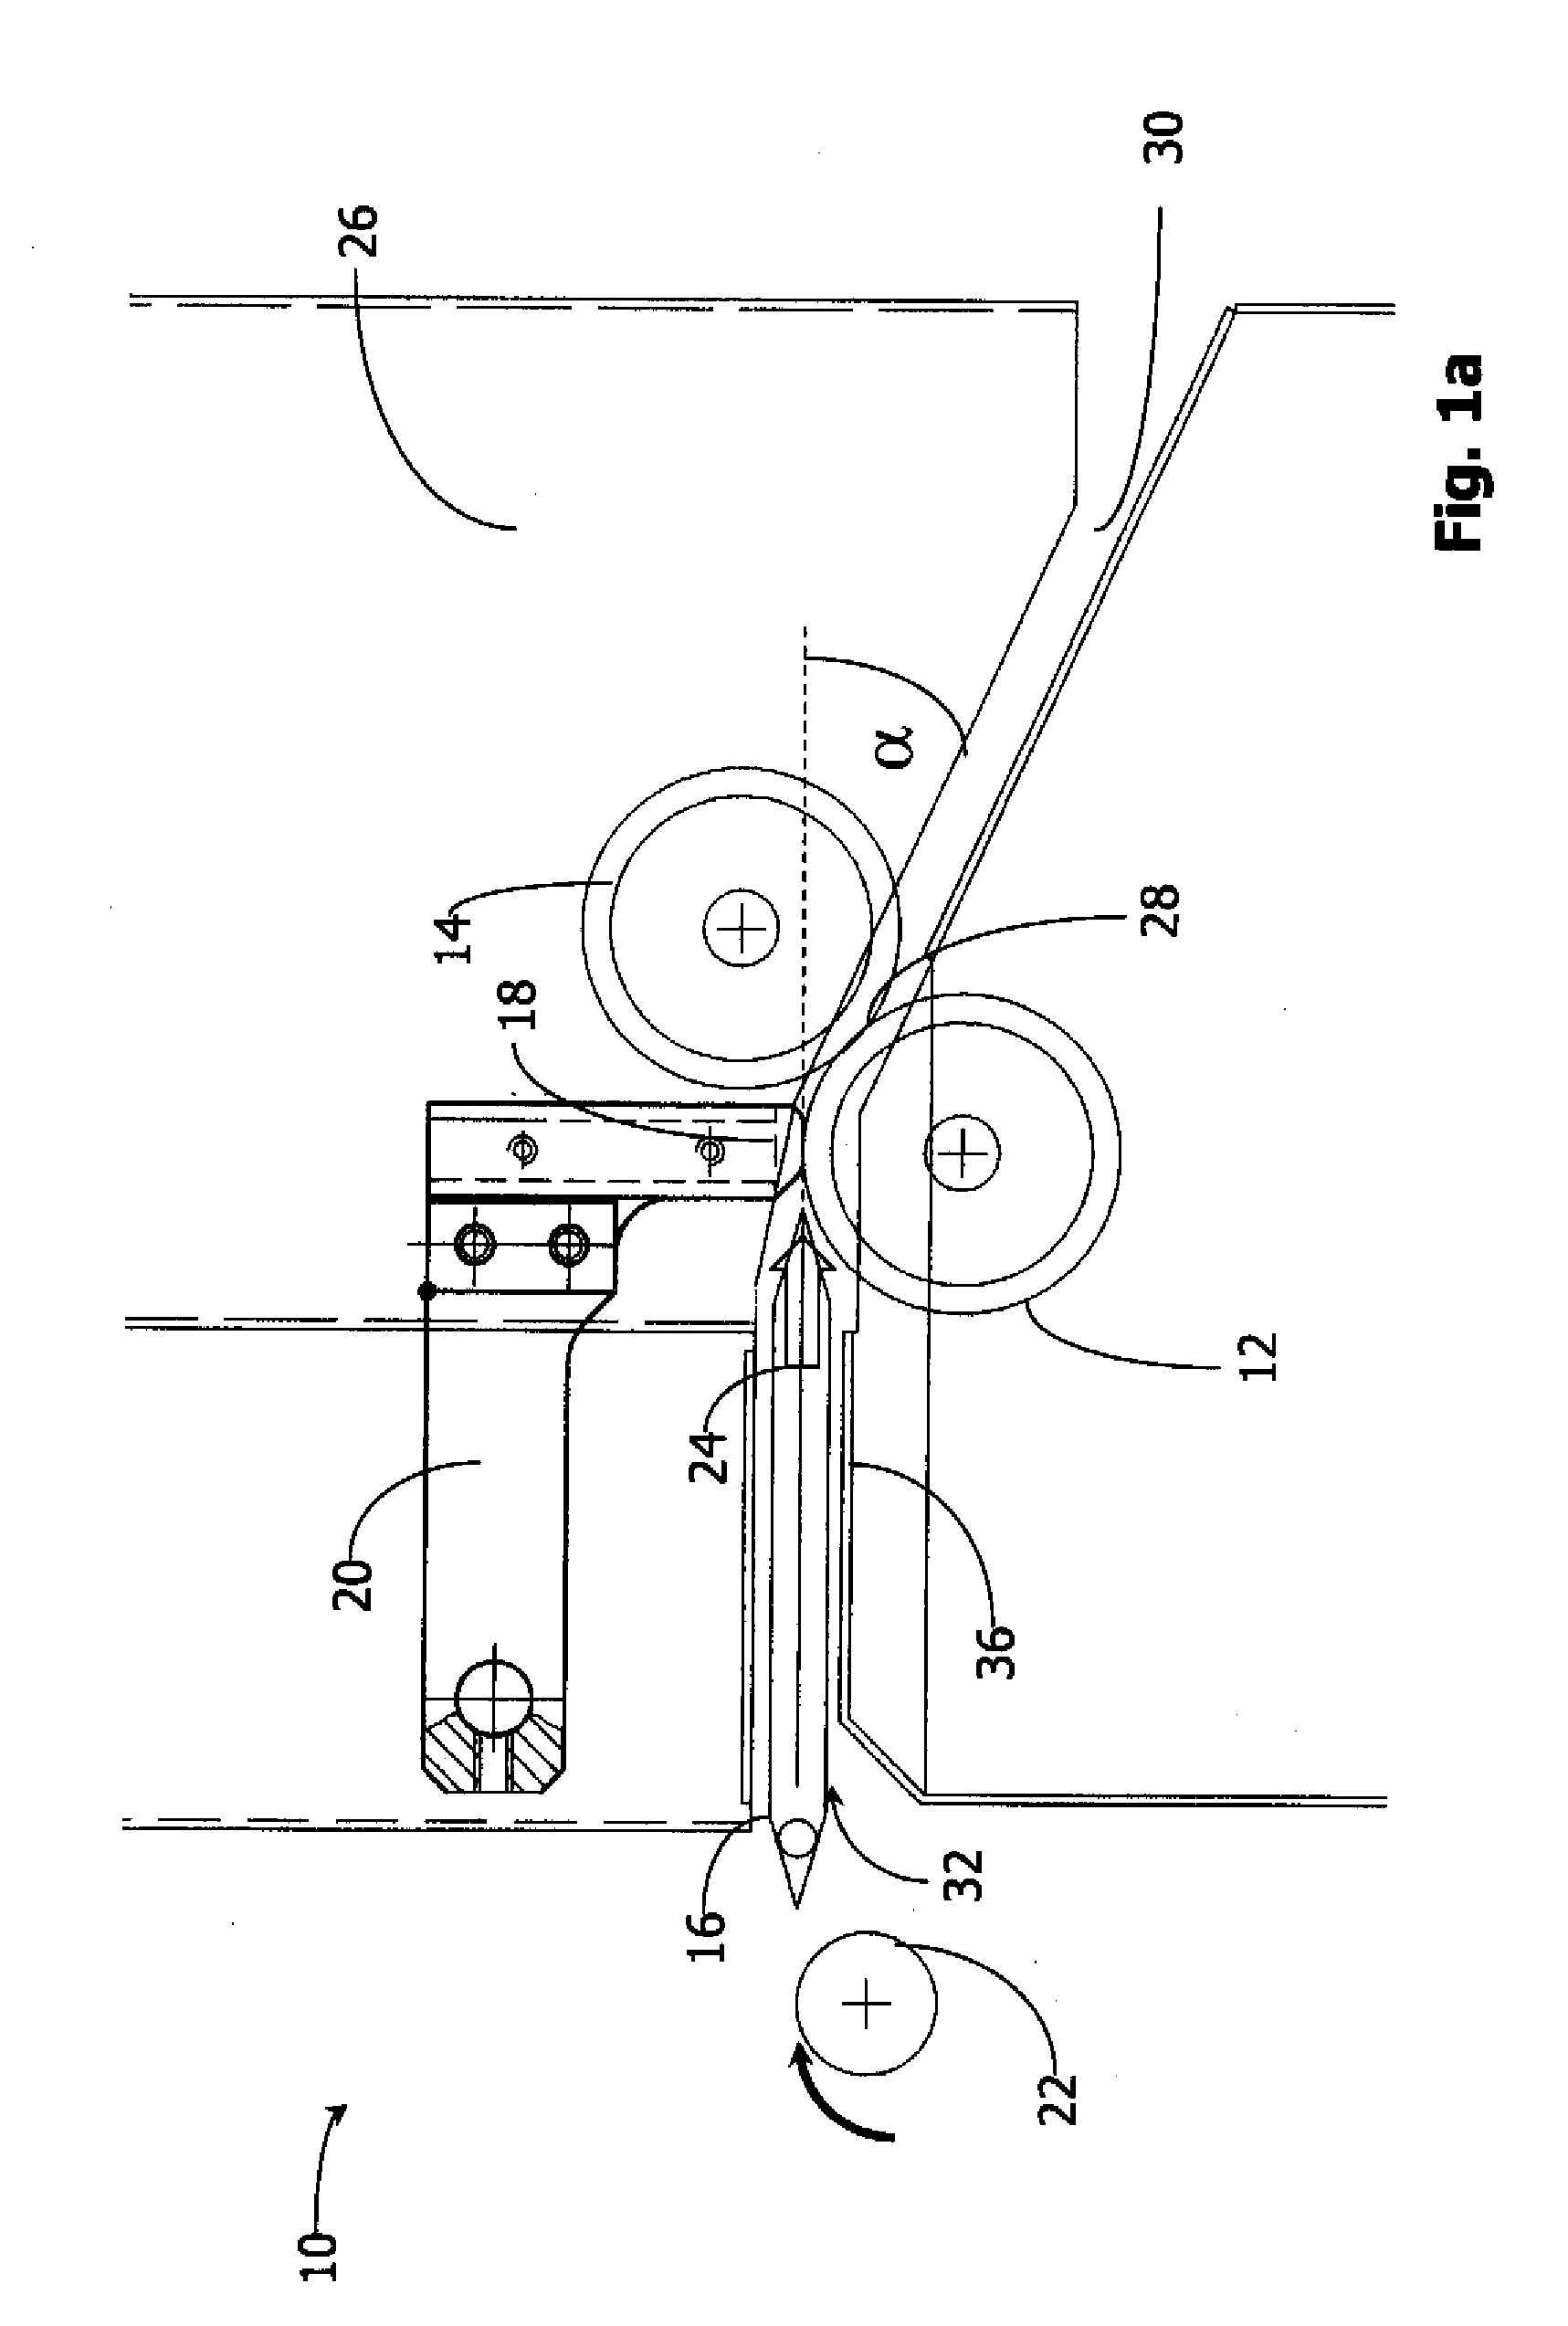 Apparatus and method for making gas-filled filling bodies